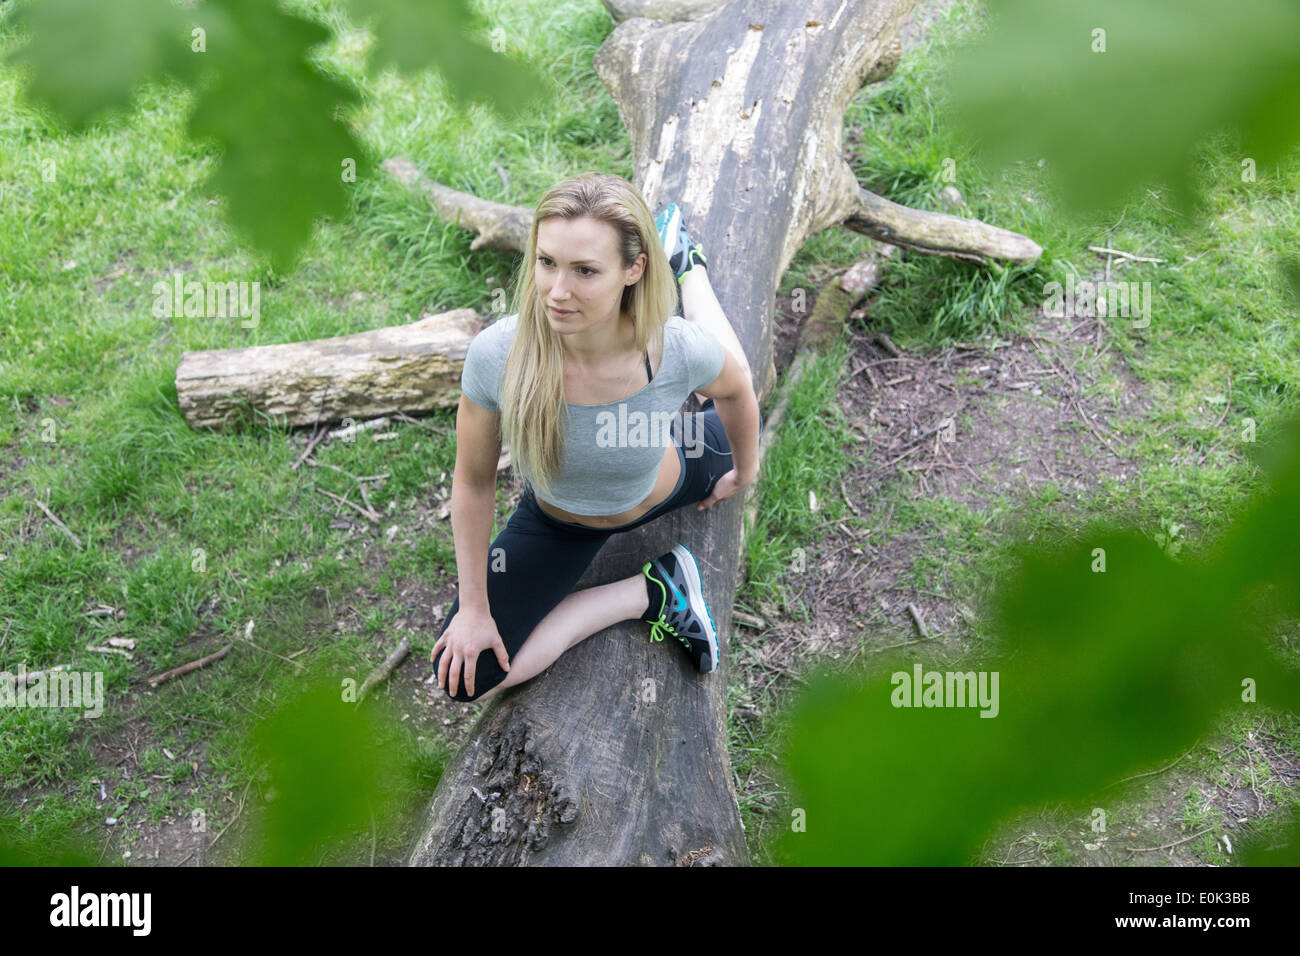 Blonde lady wearing black leggings and a grey crop top practicing yoga on a log on hampstead heath. Stock Photo